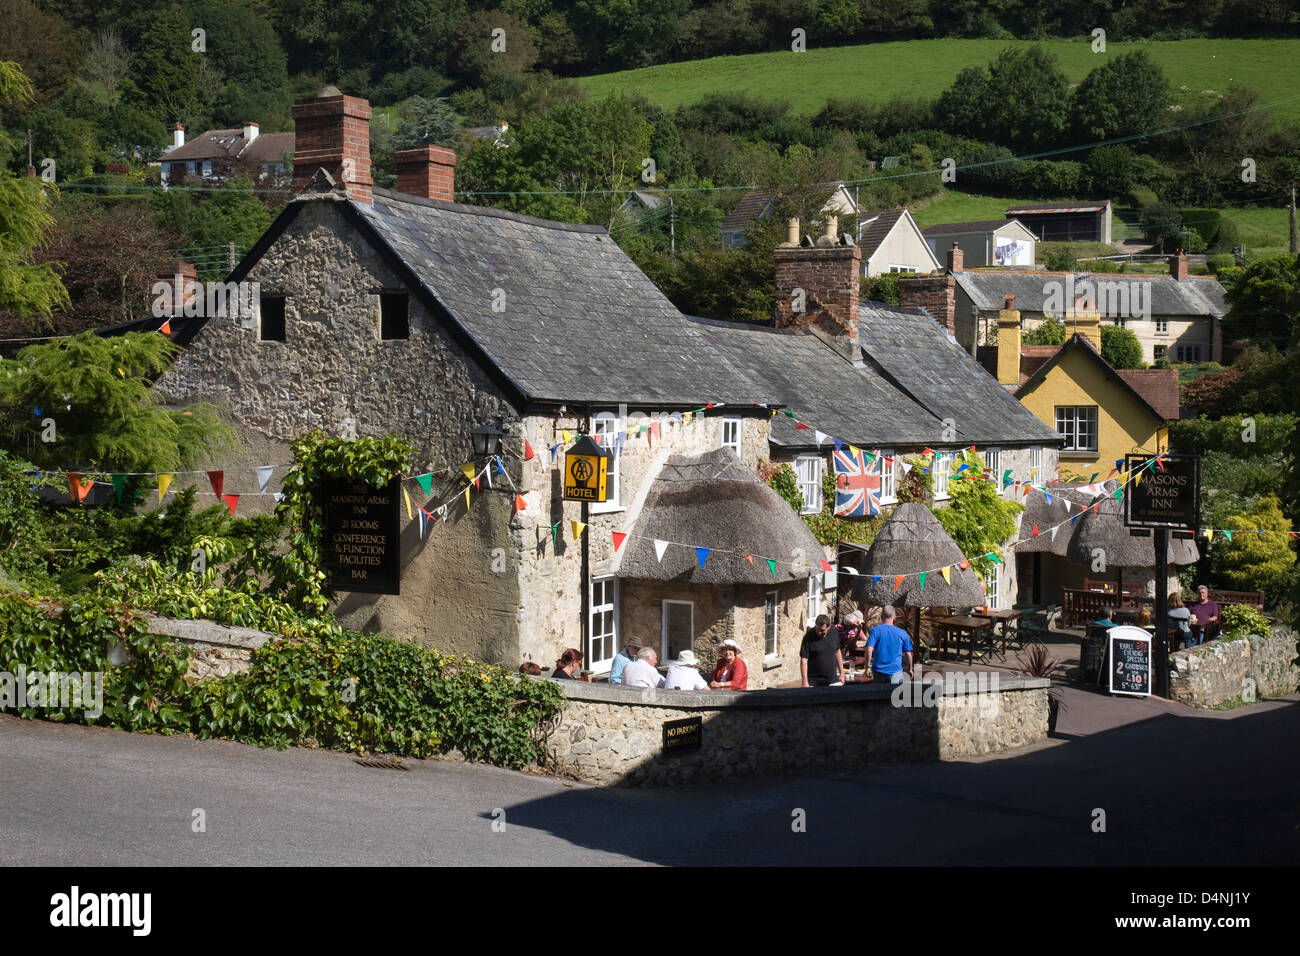 The Masons Arms hotel and pub at Branscombe village, Devon, England. Stock Photo